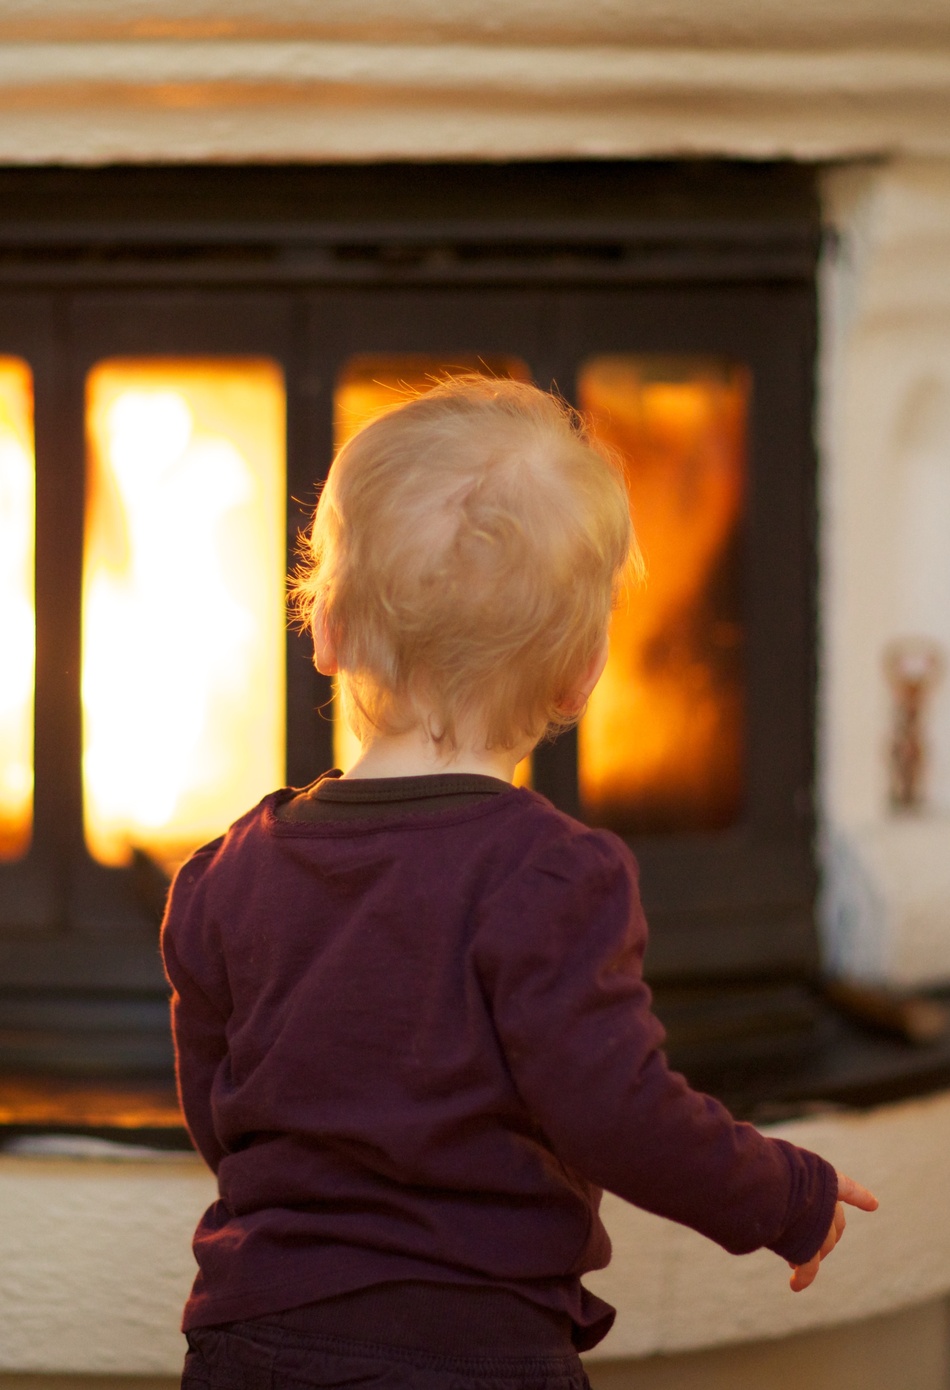 Glass-front Fireplaces Can Cause Serious Burns